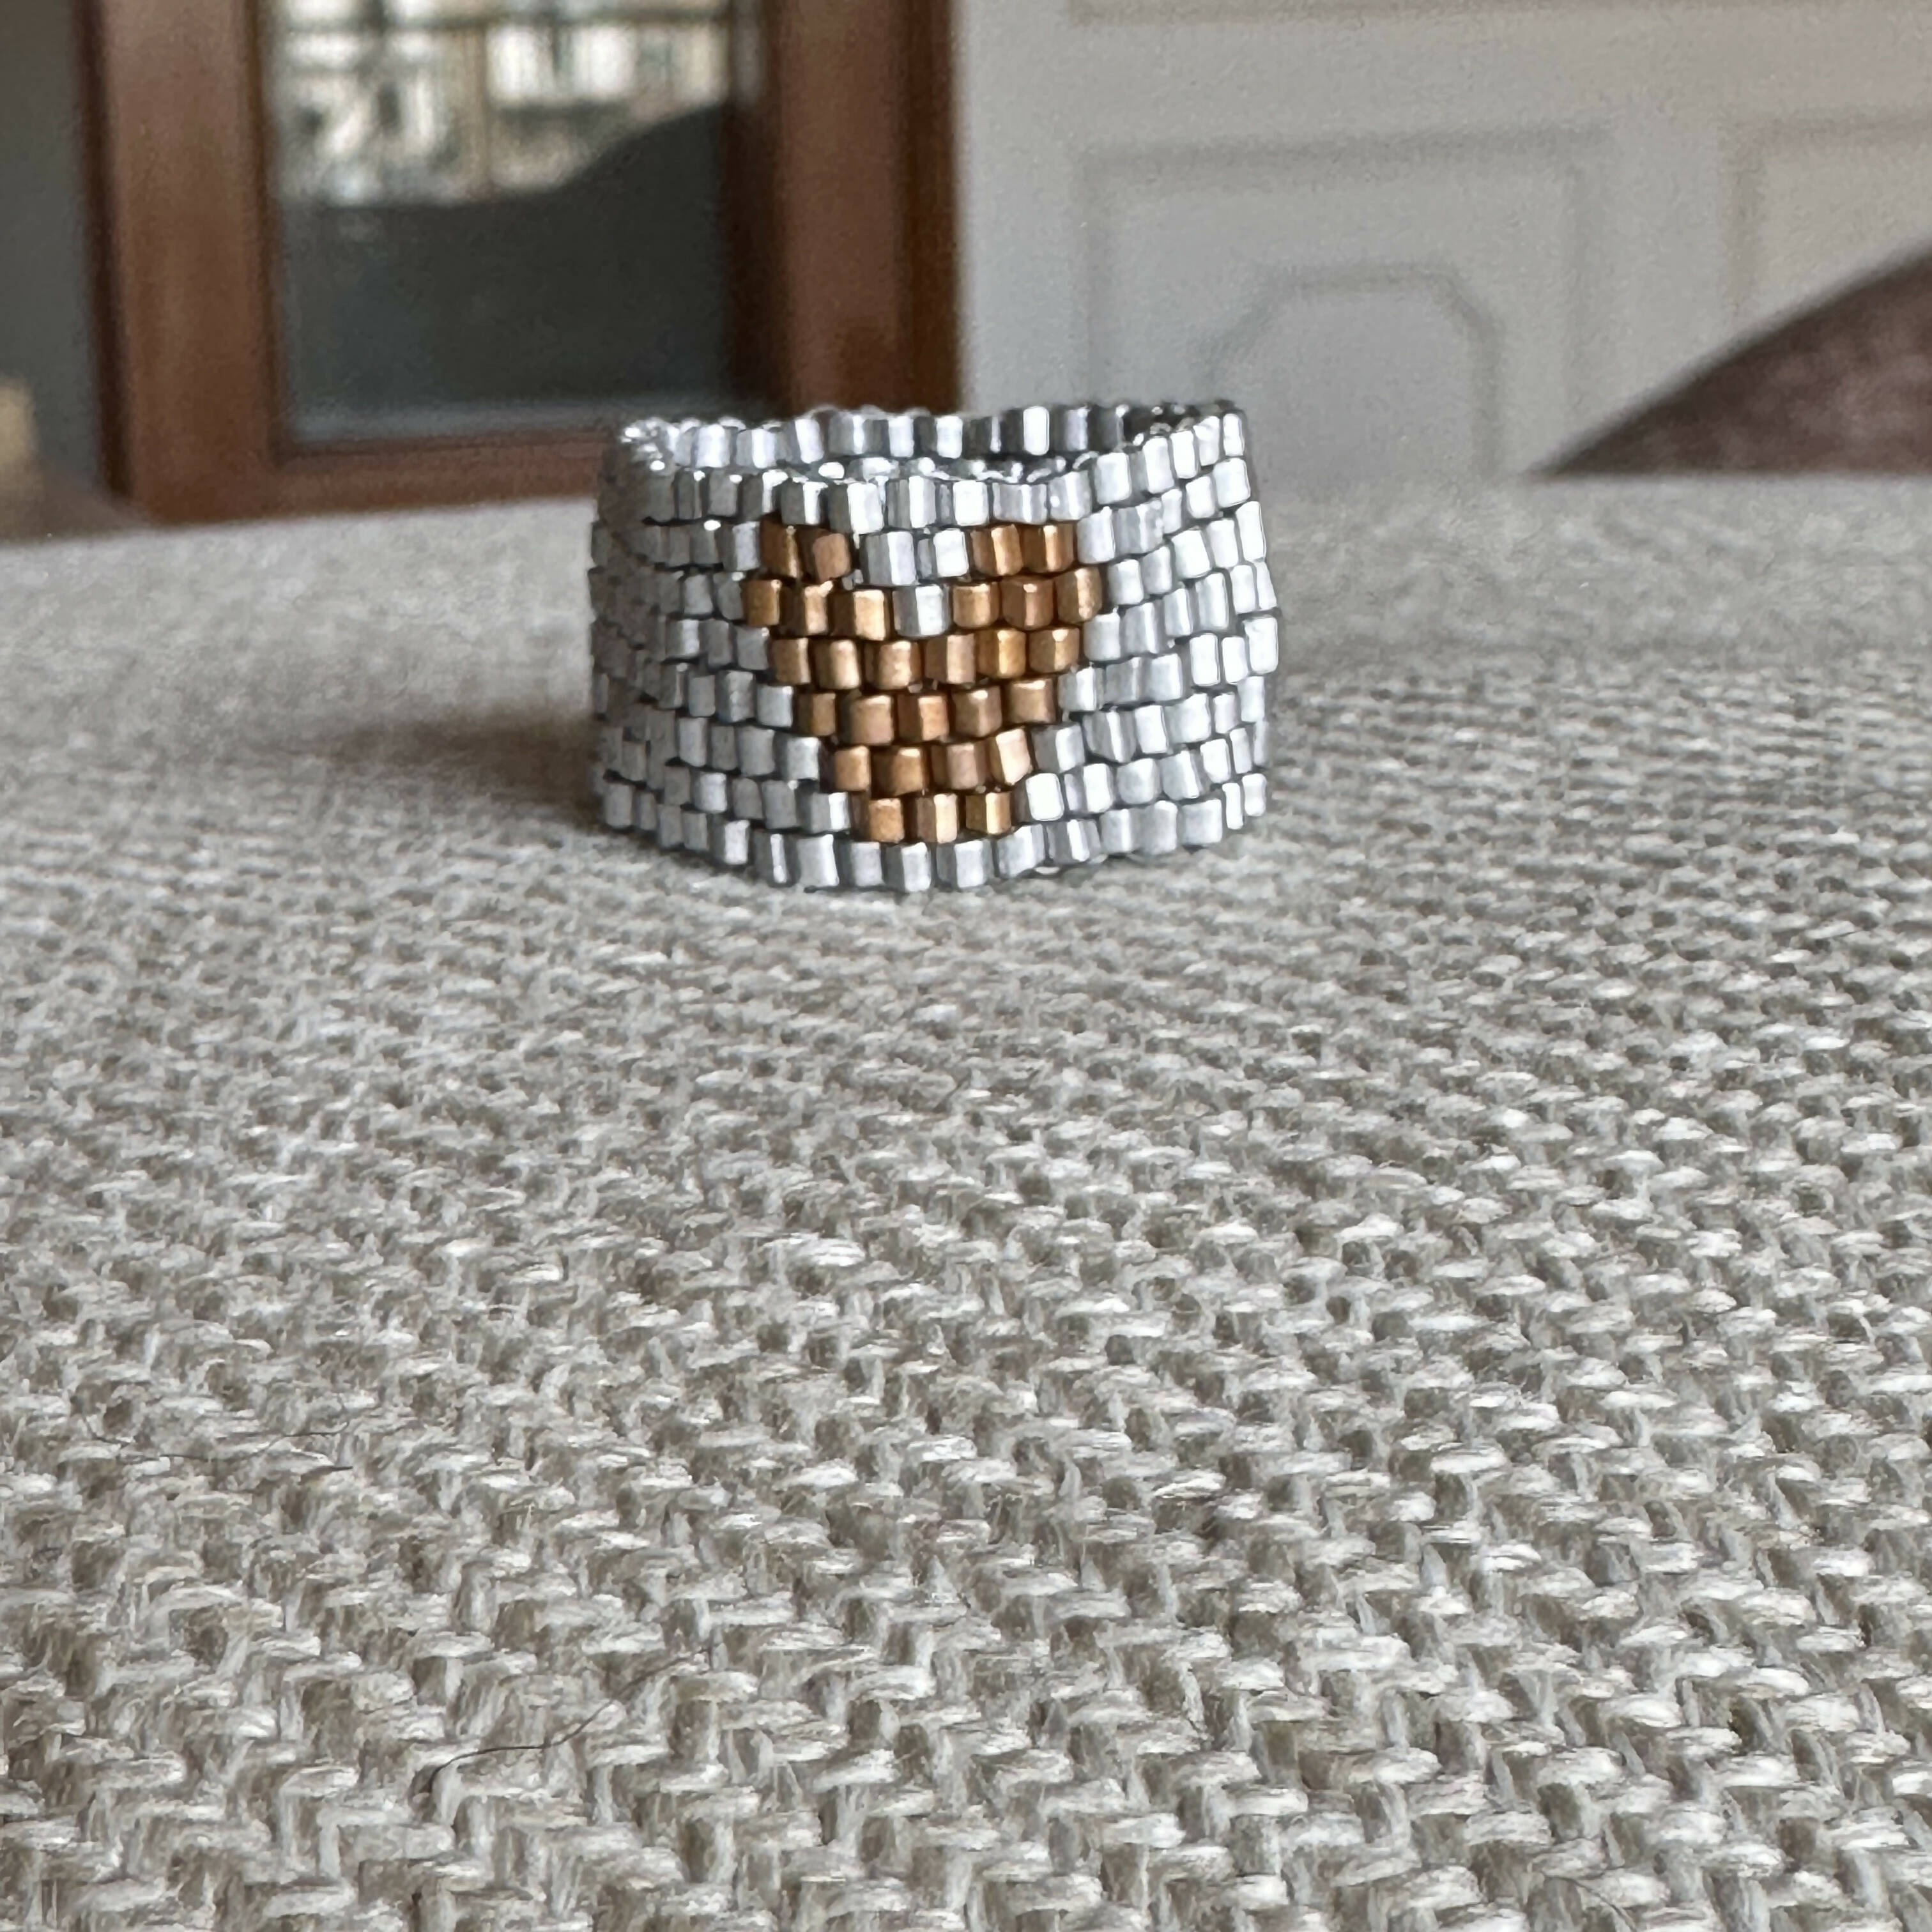 The PUT A RING ON IT collection: Golden heart on silver, 8 rows!